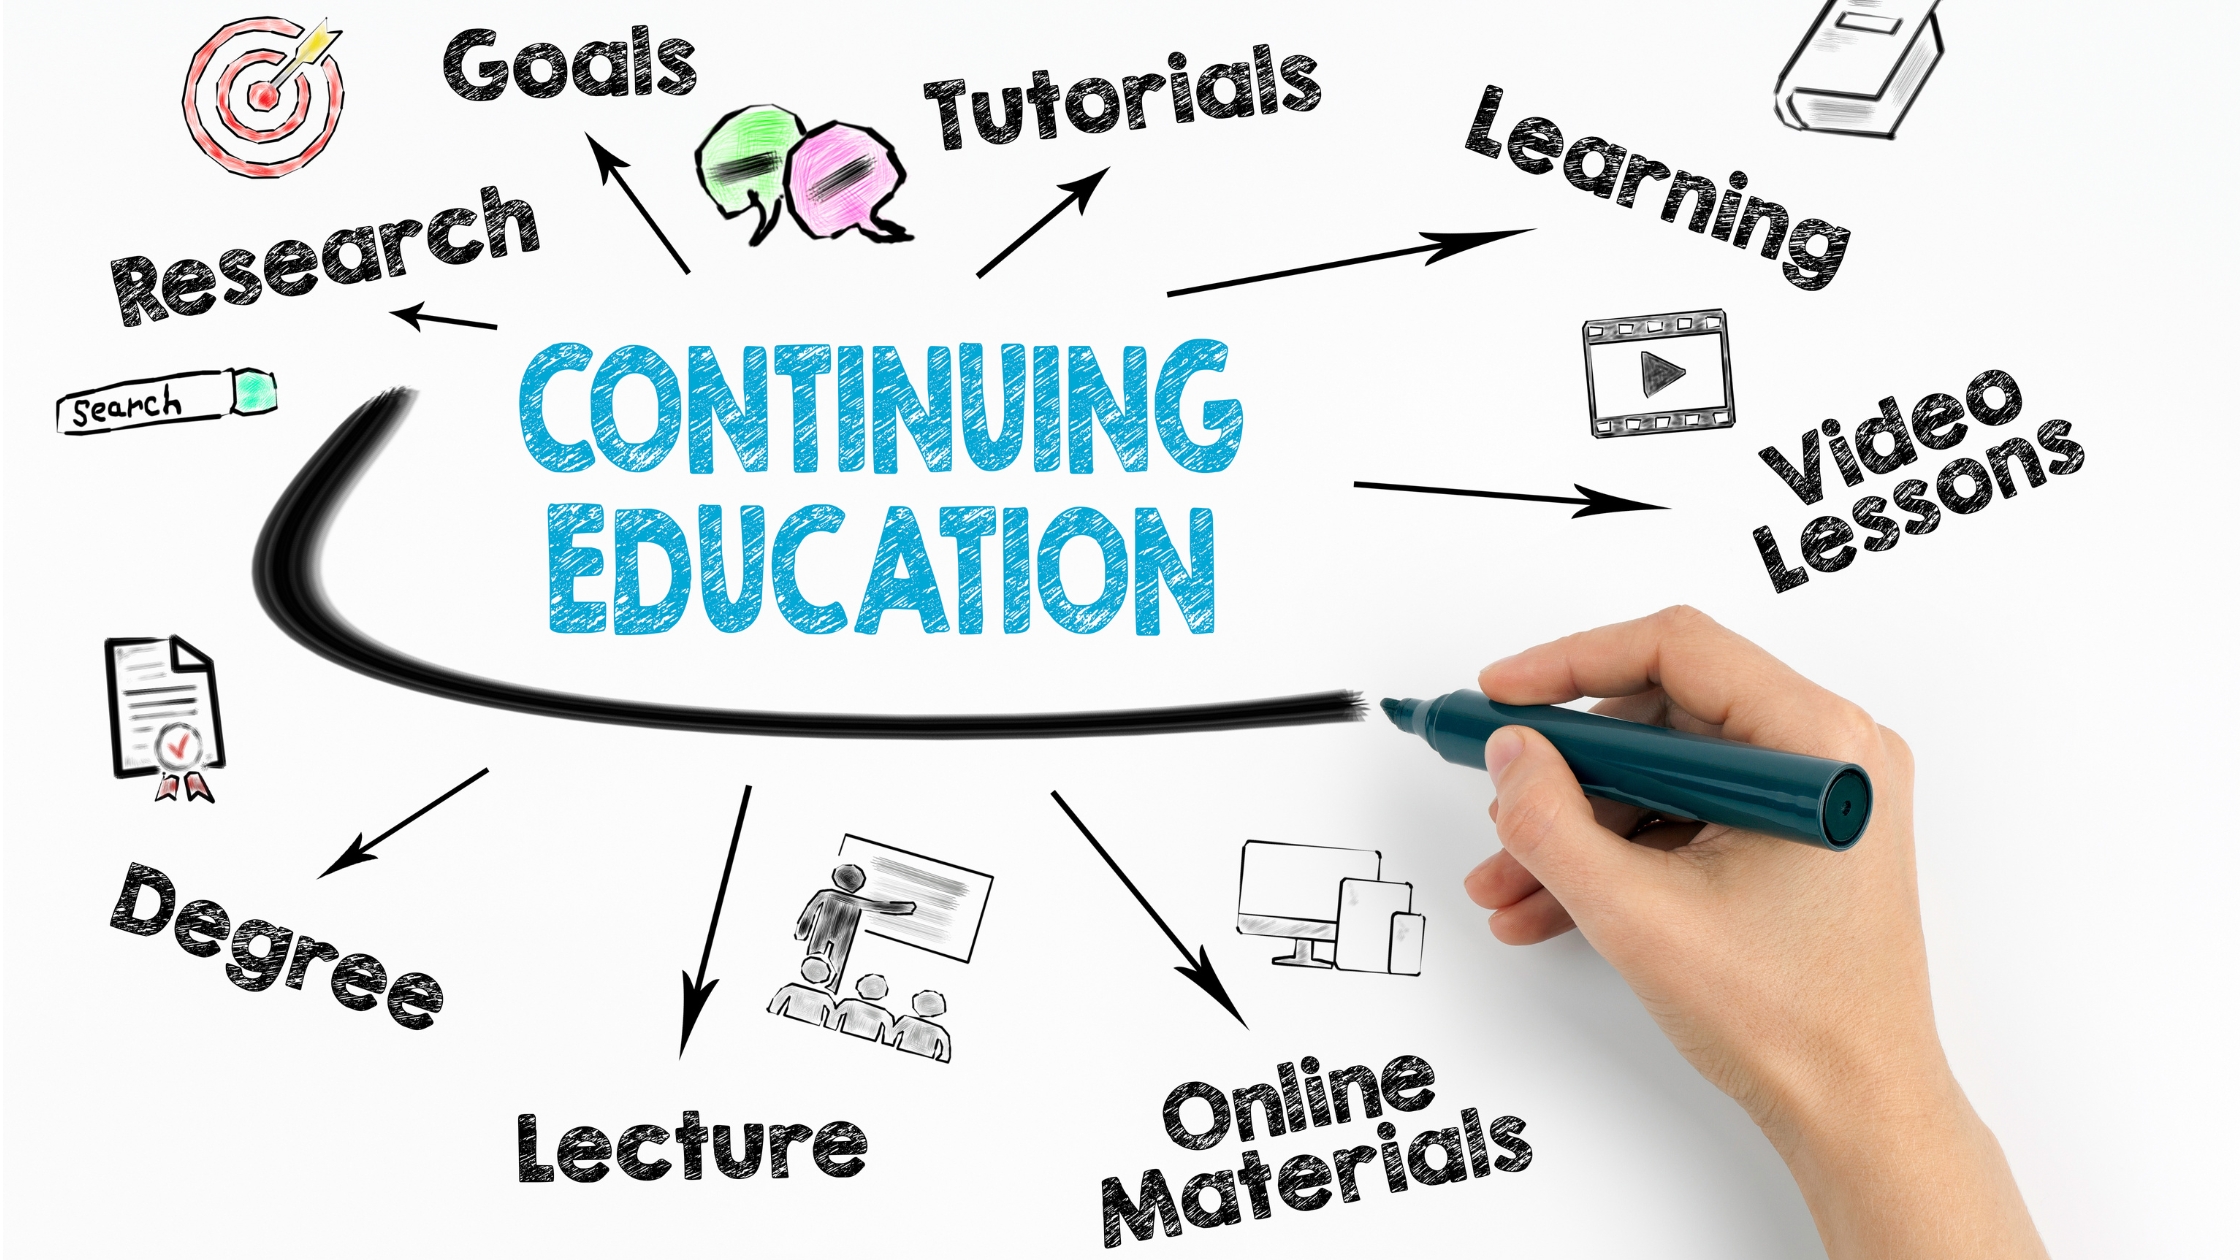 What is ceu and what are the benefits